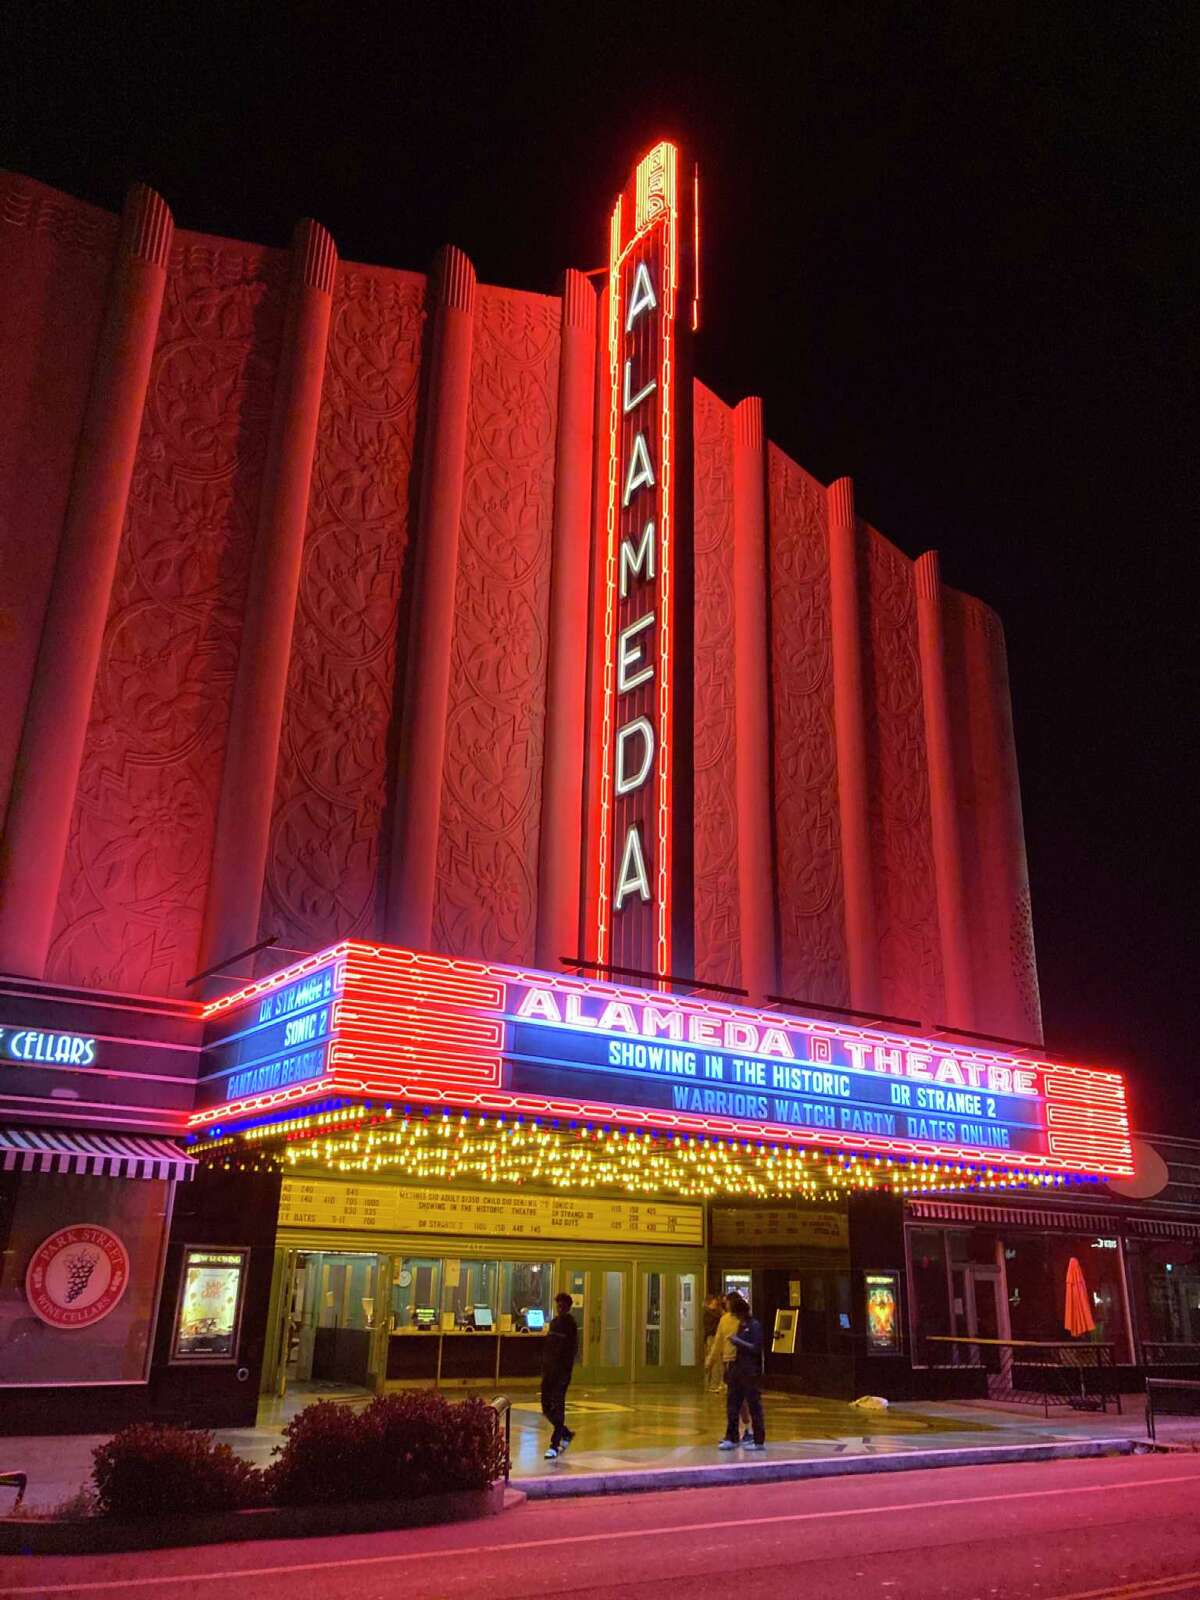 The front of the Alameda Theatre lit up at night with neon.